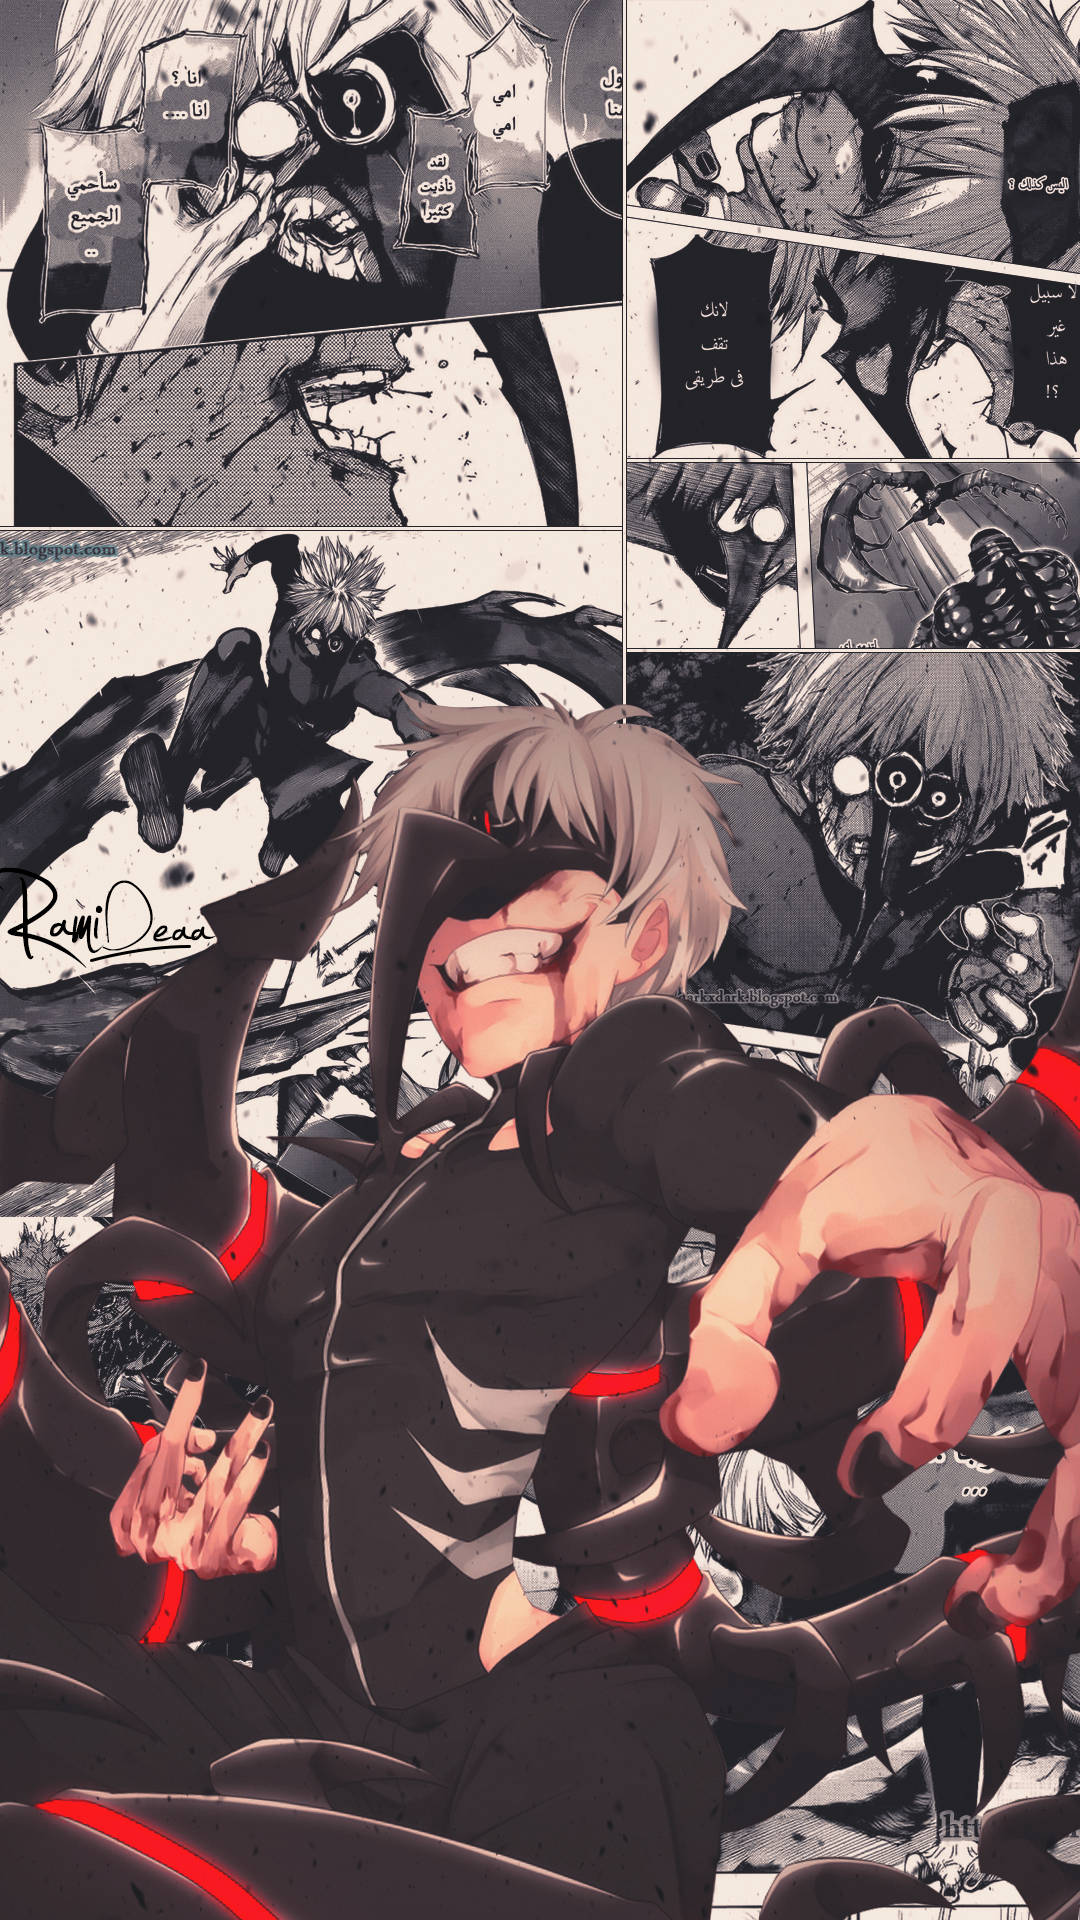 Life must go on, even in Tokyo Ghoul Aesthetic Wallpaper